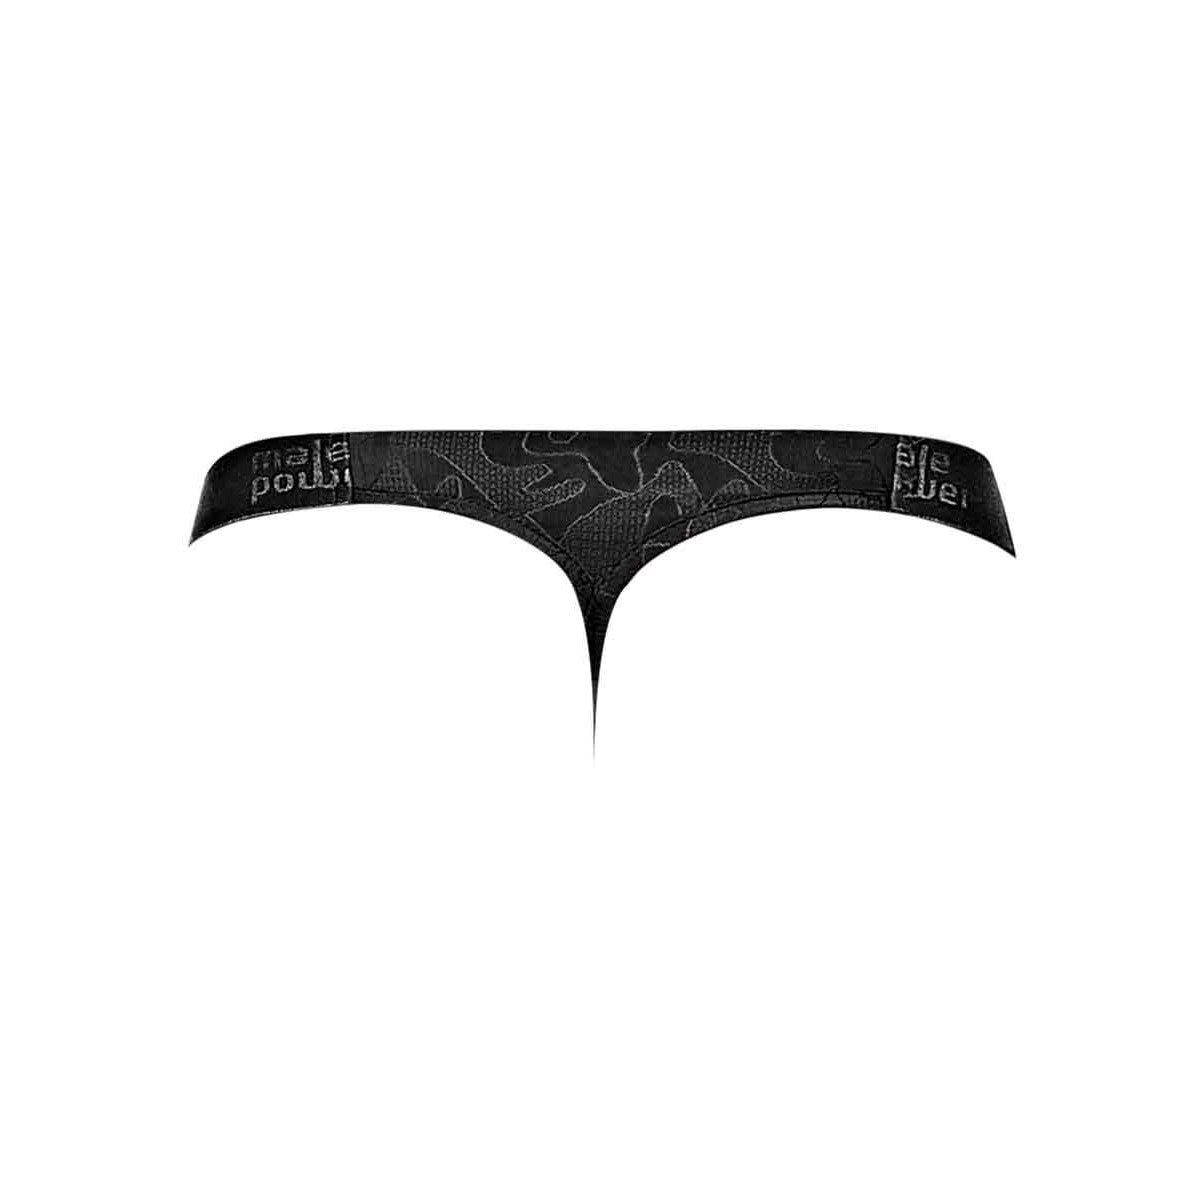 Impressions Micro G-string Black S-m Intimates Adult Boutique